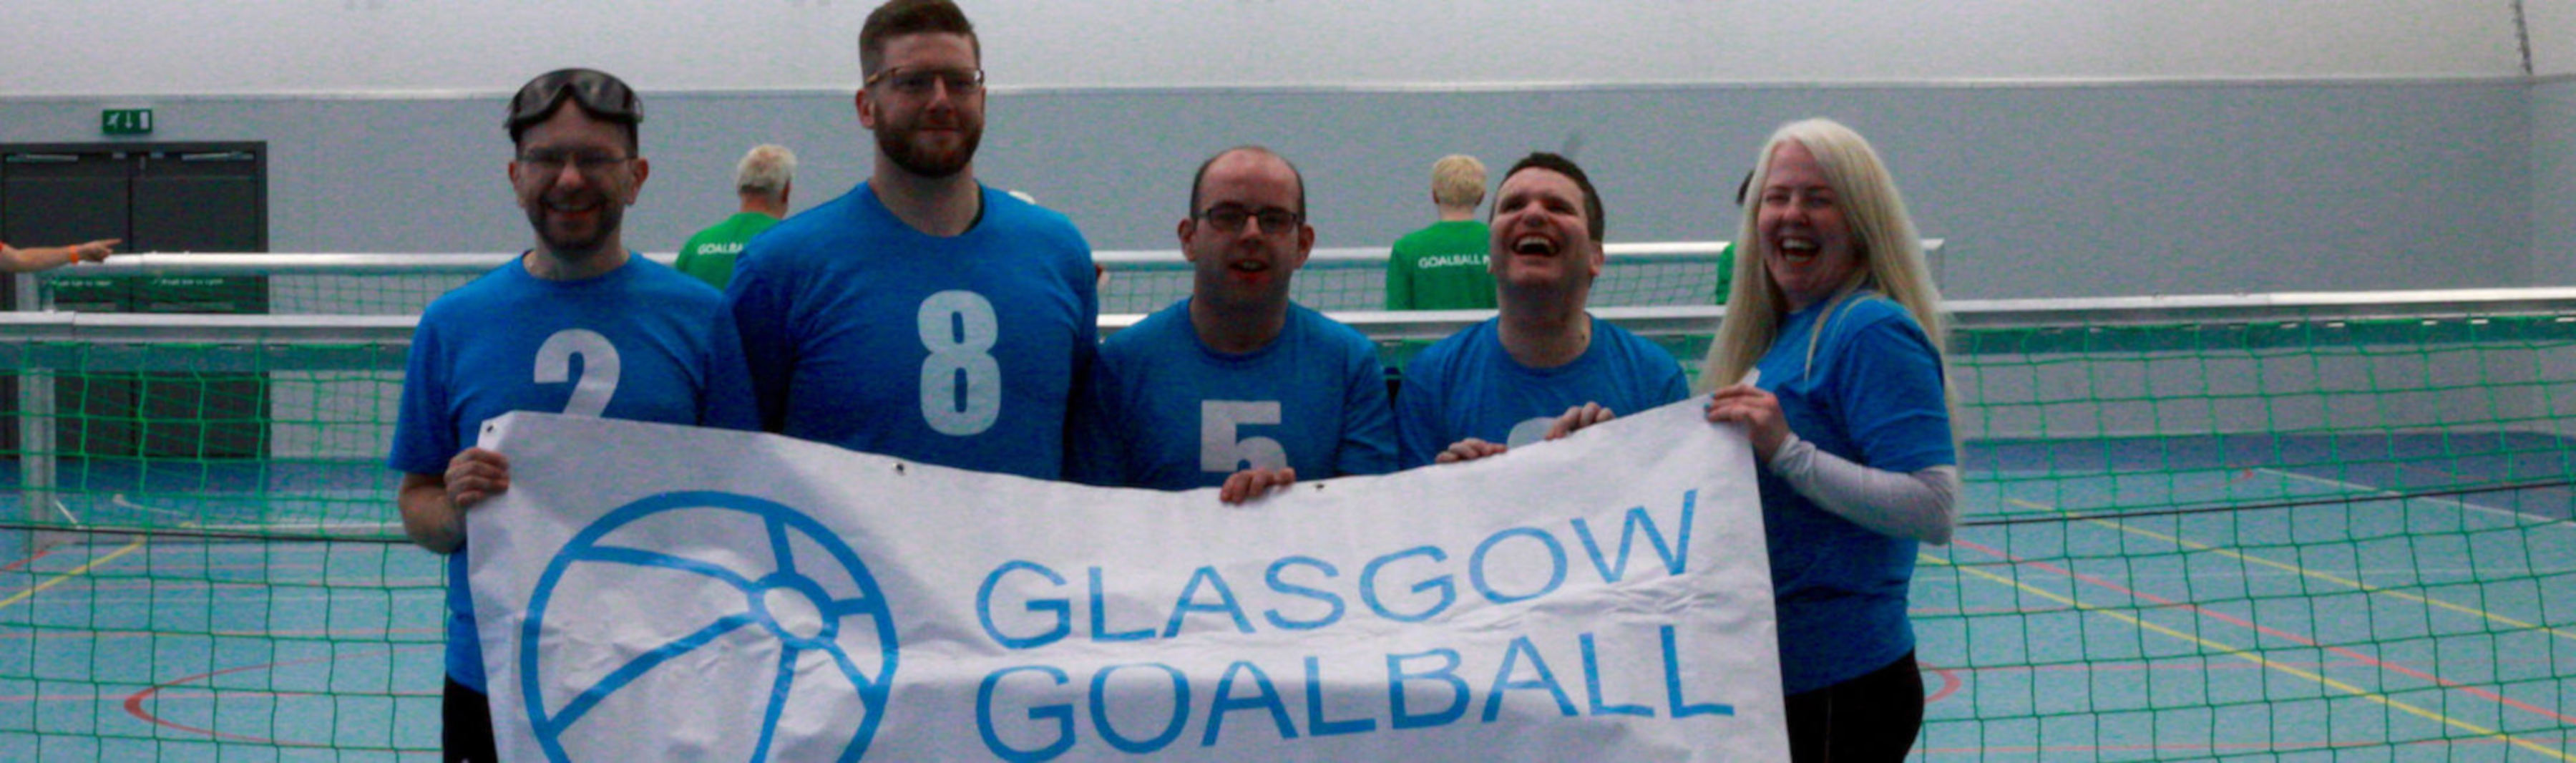 Members of the club holding a Glasgow Goalball banner